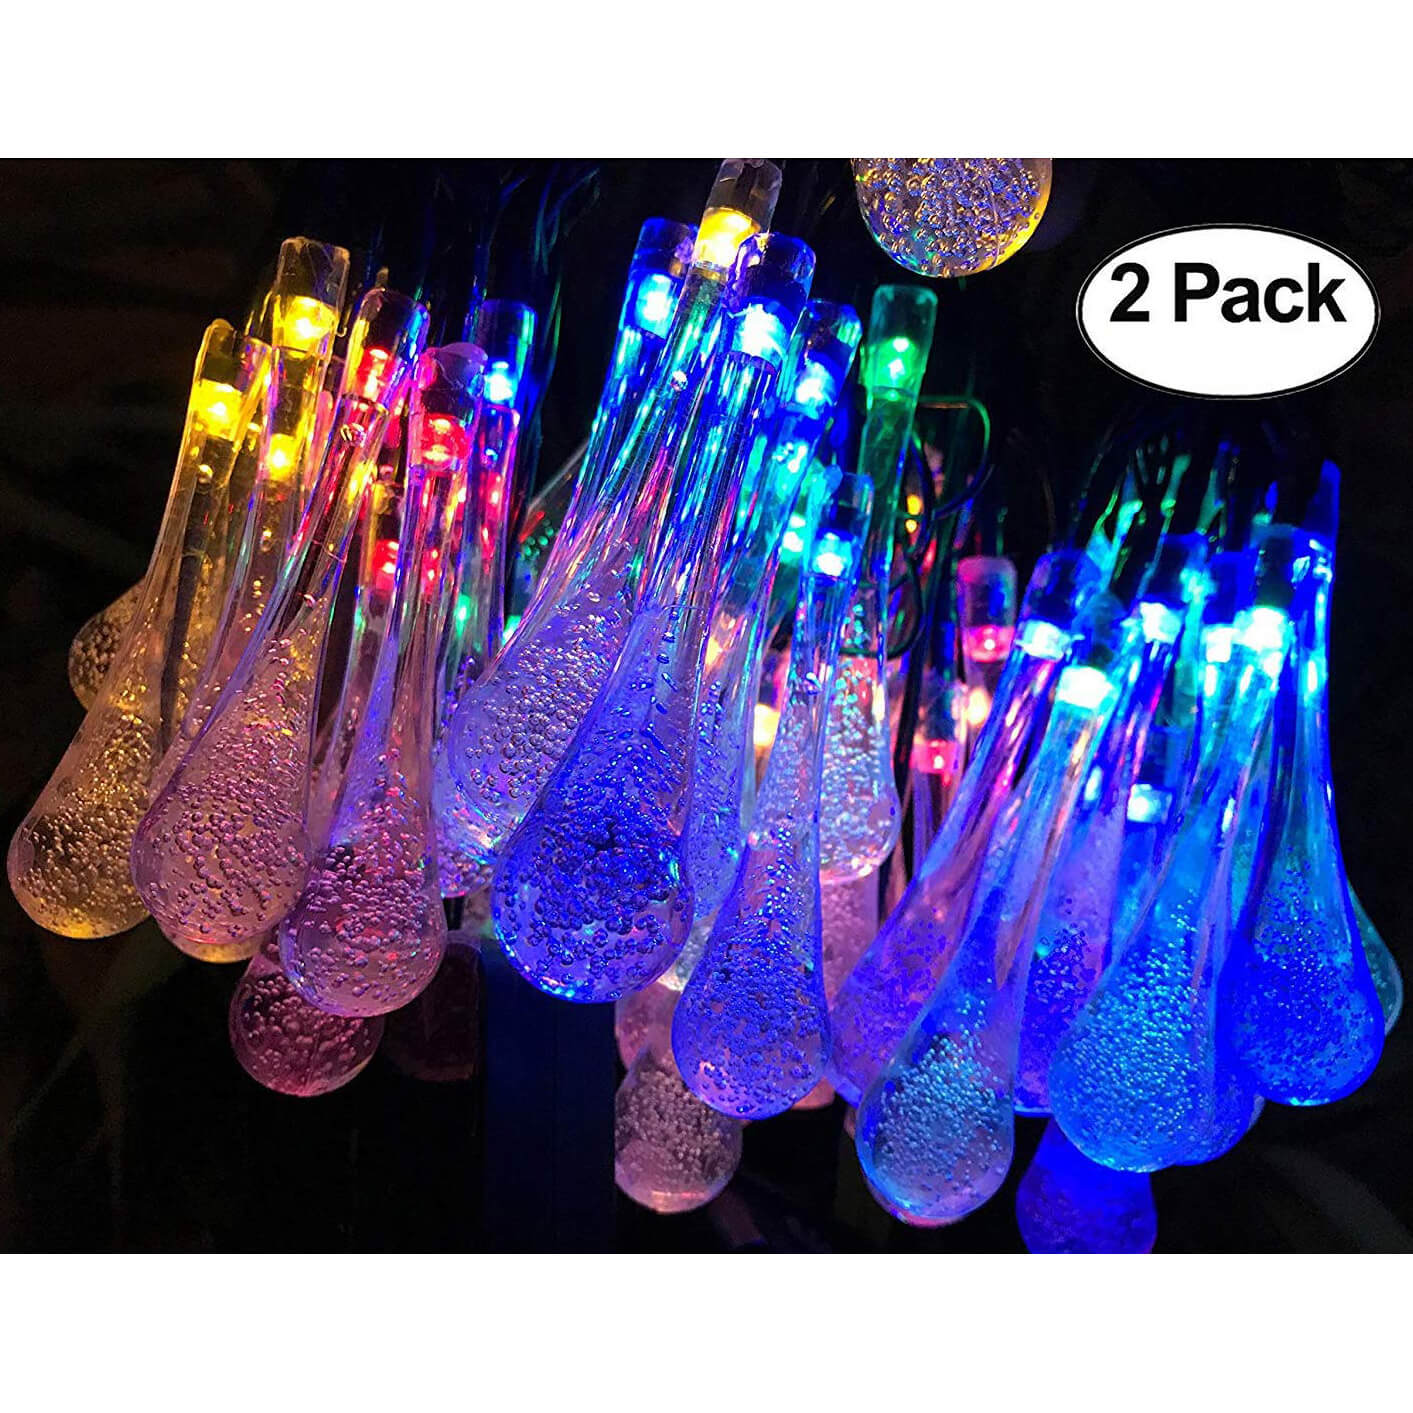 Best Solar String Lights For 2021, What Is The Best Outdoor Solar String Lights